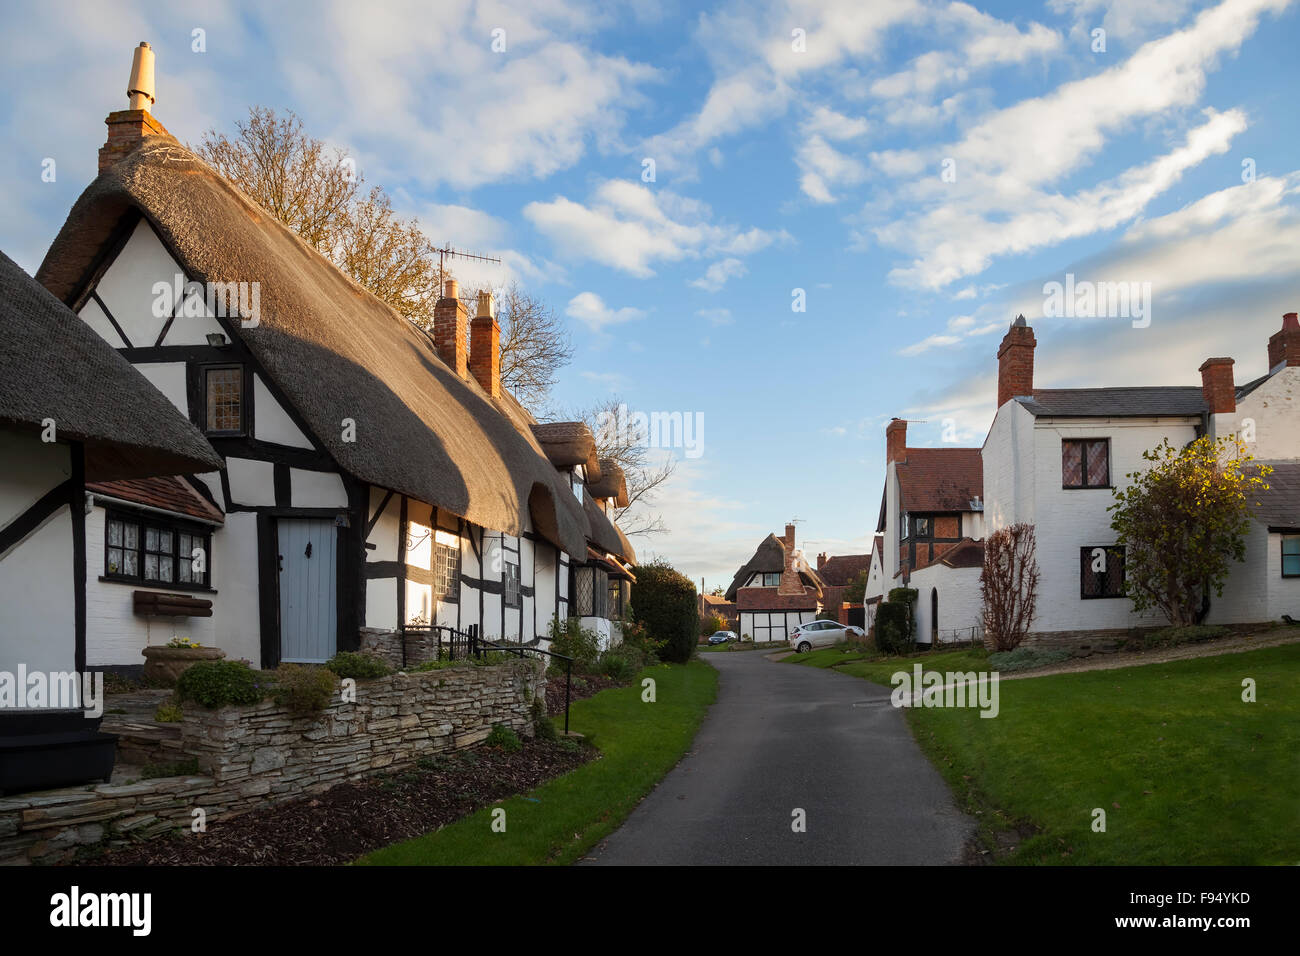 Thatched cottages at Welford on Avon, Warwickshire, England. Stock Photo